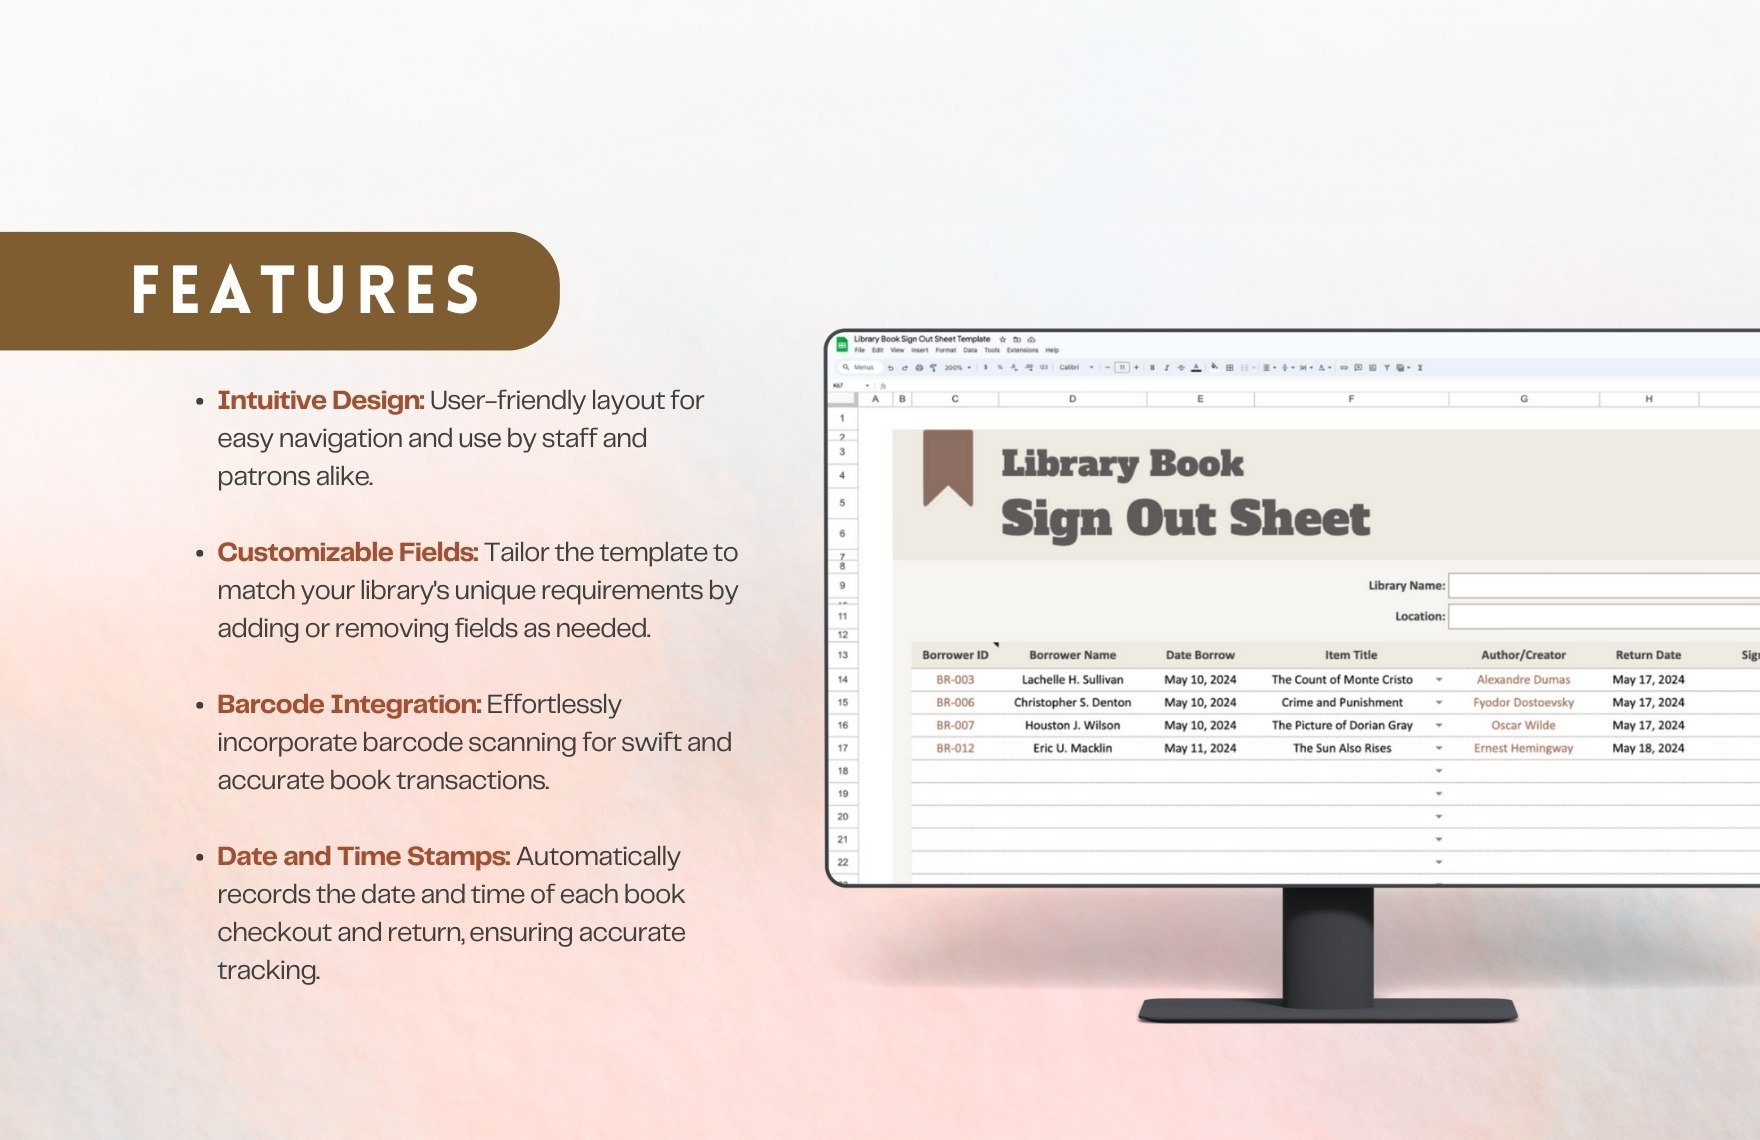 Library Book Sign Out Sheet Template